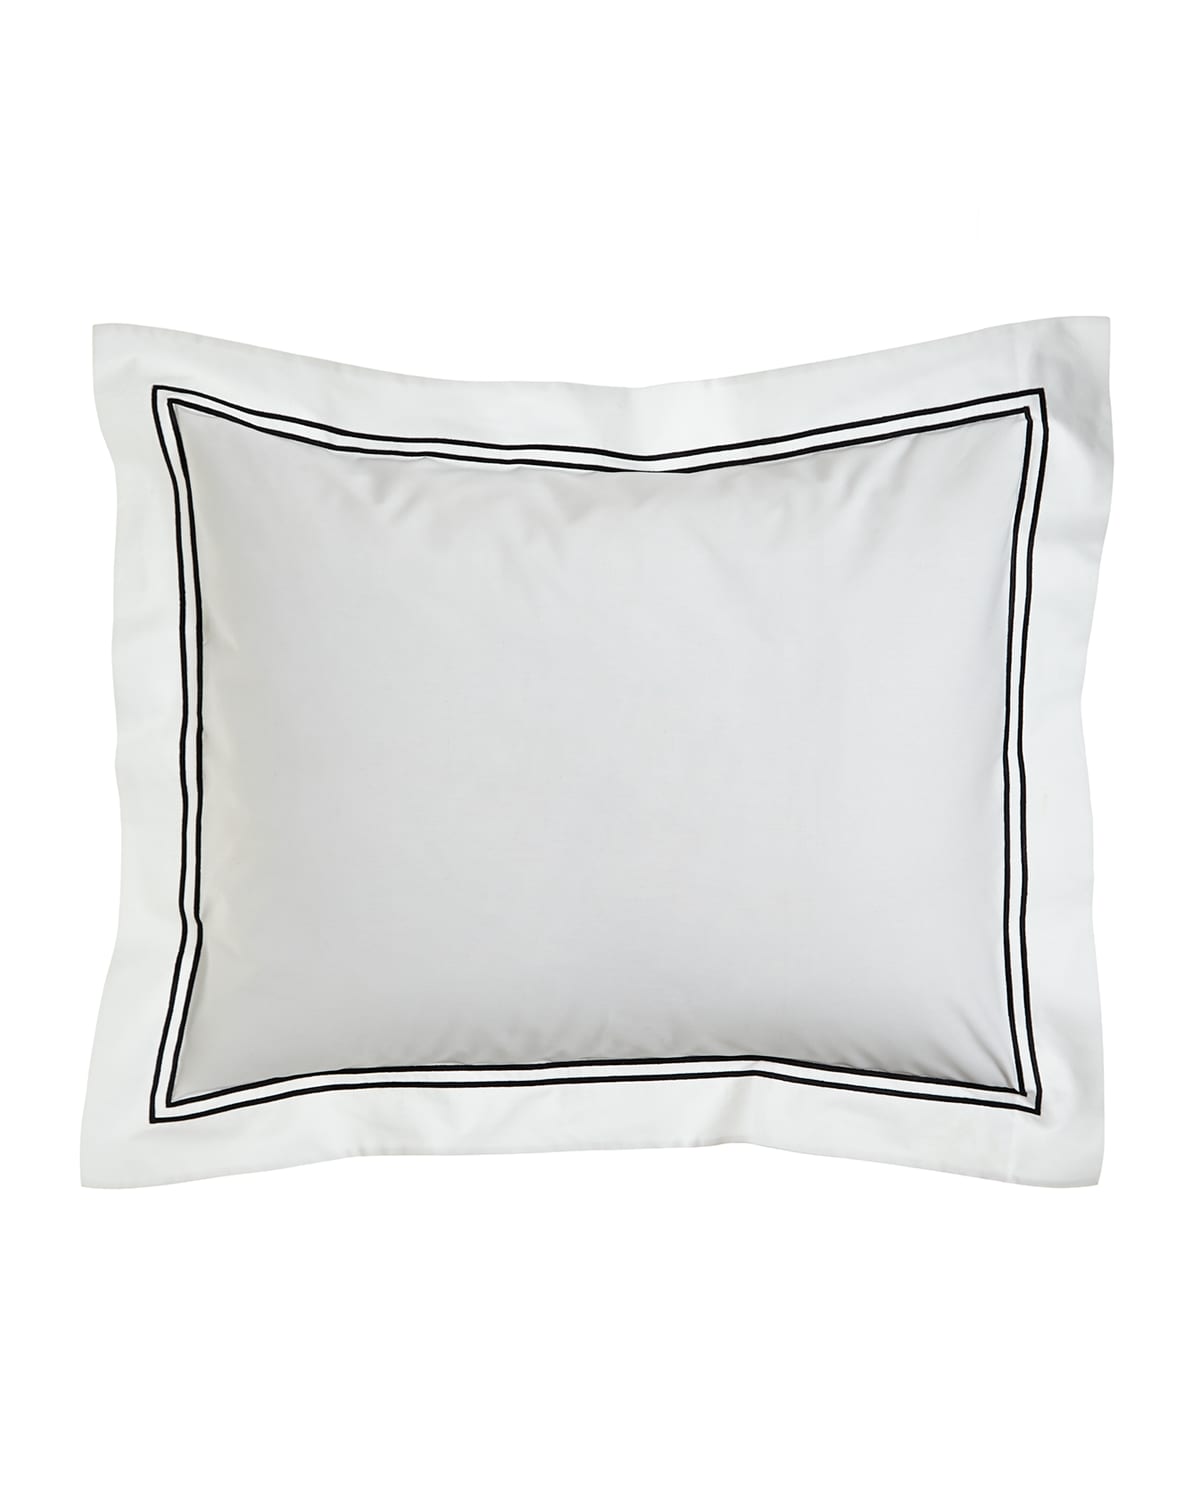 Two Standard 200 Thread-Count Resort Pillowcases